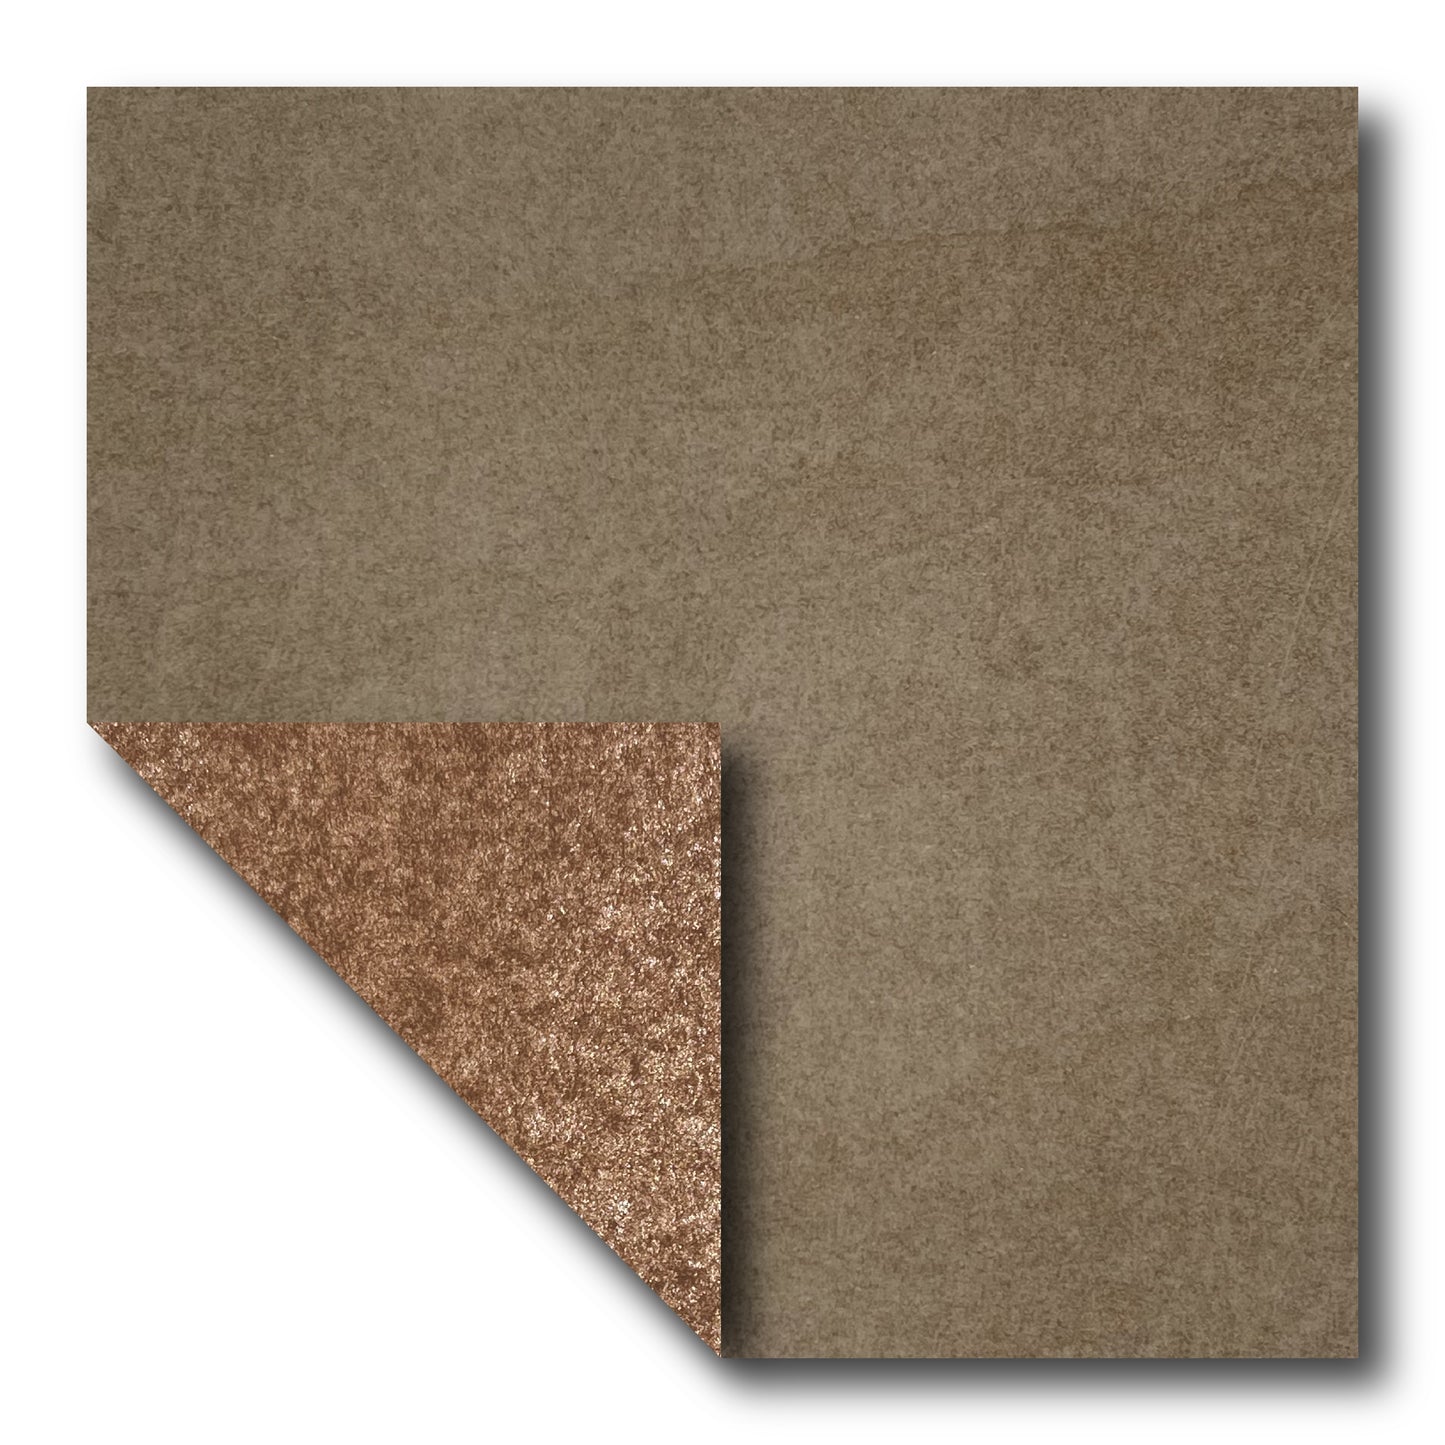 Double Tissue Foil Origami (Dual Color: Tan/Brown) (Sold per sheet)